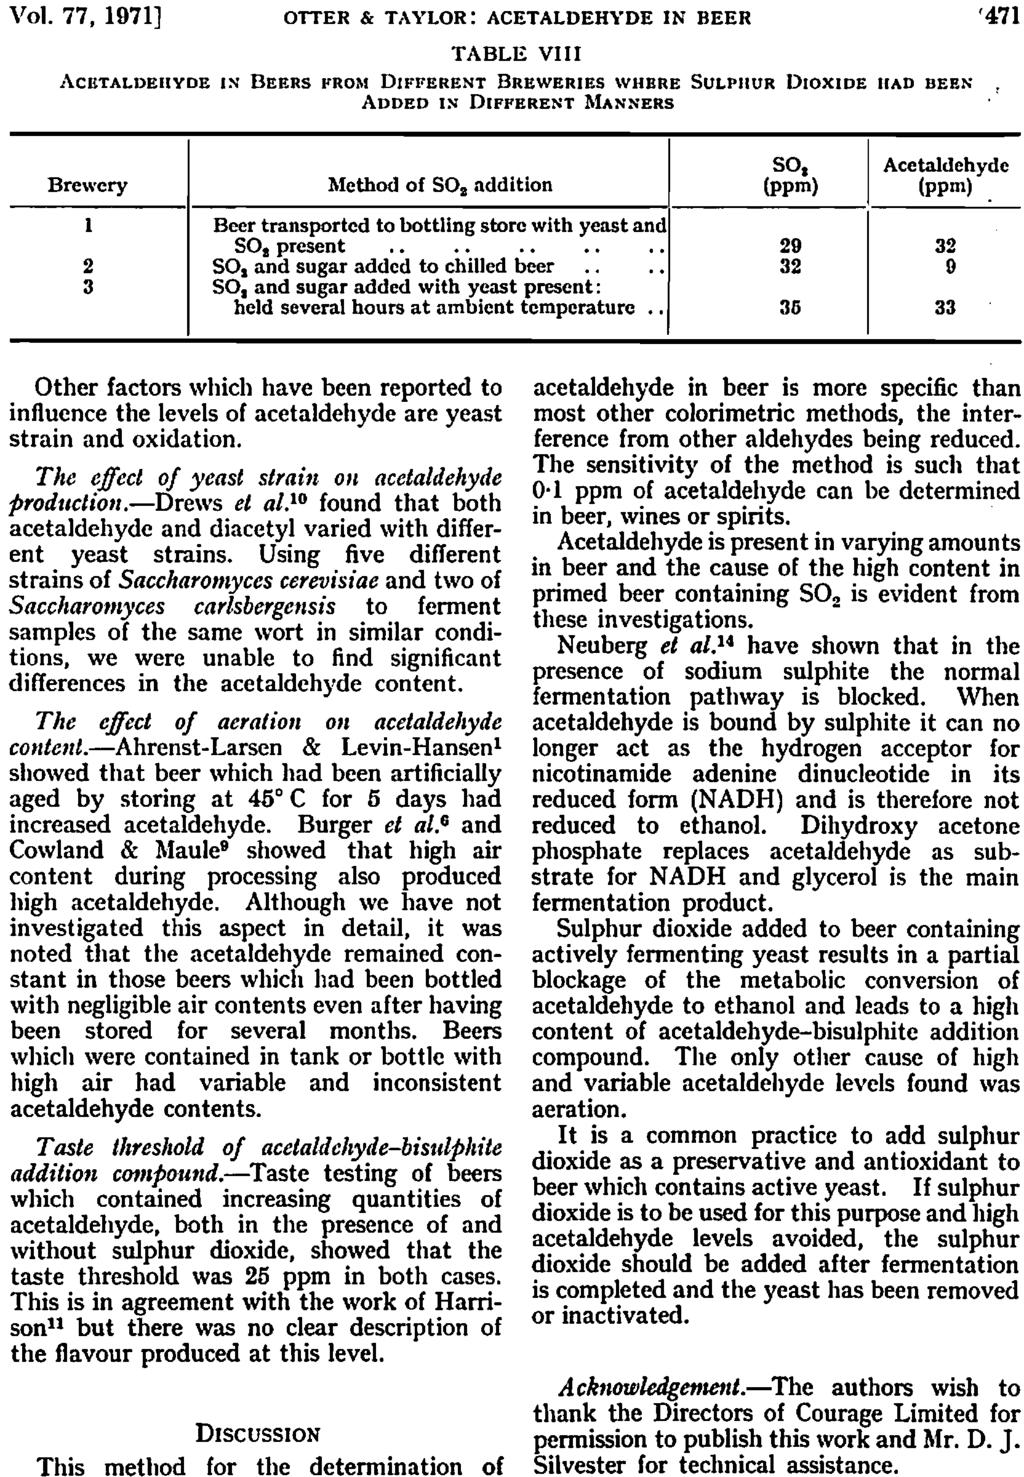 Vol. 77, 1971] OTTER & TAYLOR: ACETALDEHYDE IN BEER '471 acbtaldehyde in beers from different breweries where sulphur dioxide had been Added in Different Manners VIII Brewery Method of SO: addition